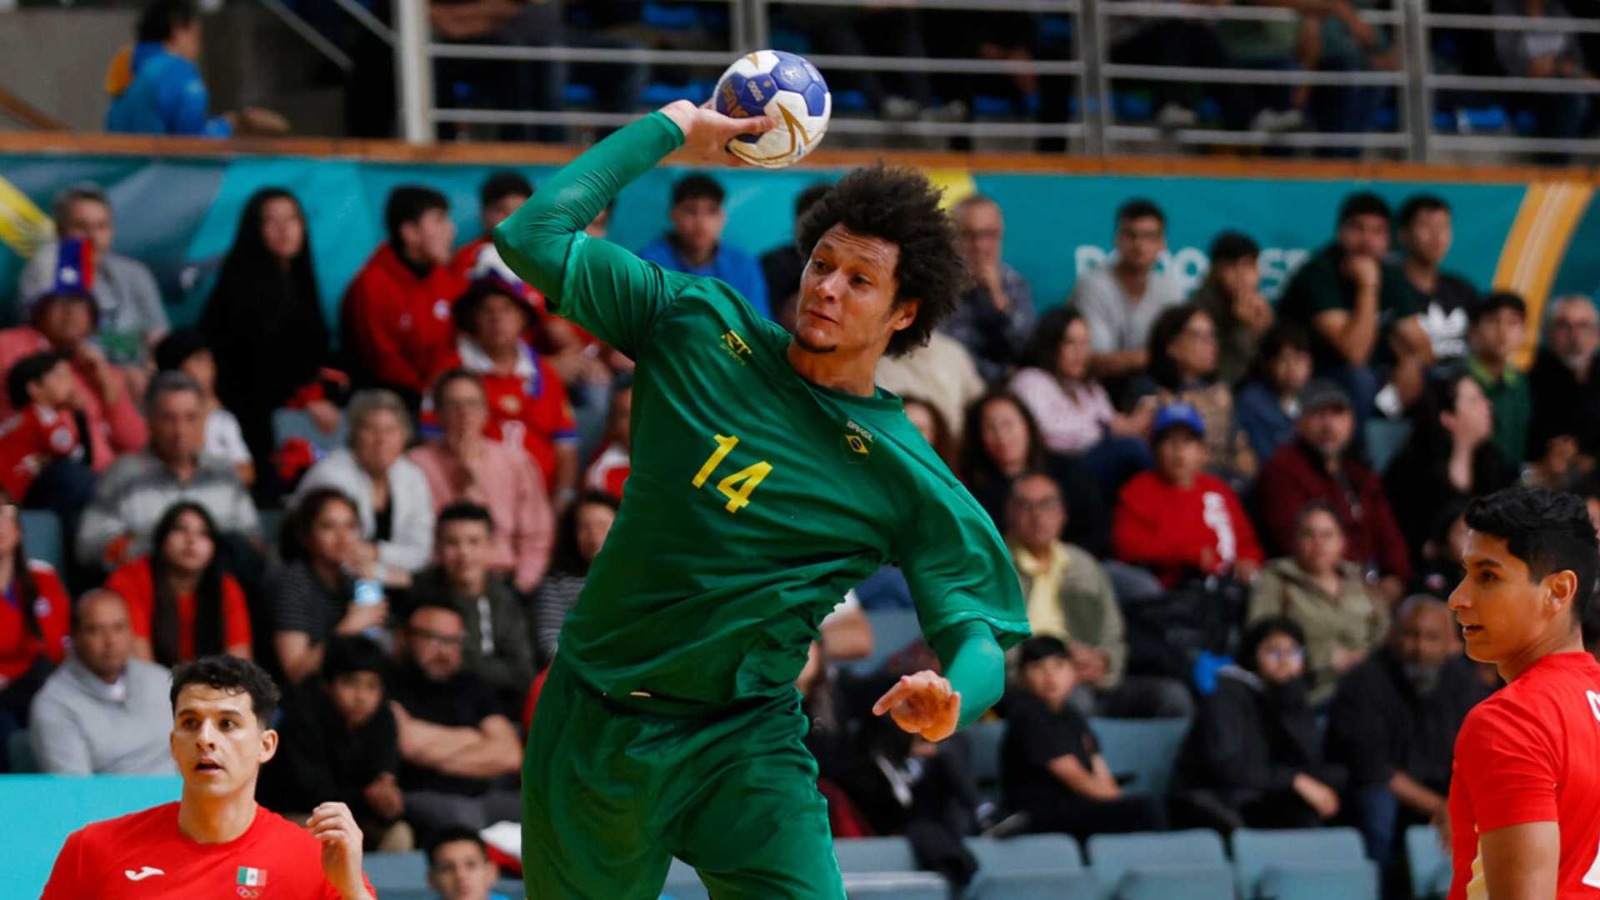 Brazil debuts by dominating Mexico in Male Handball